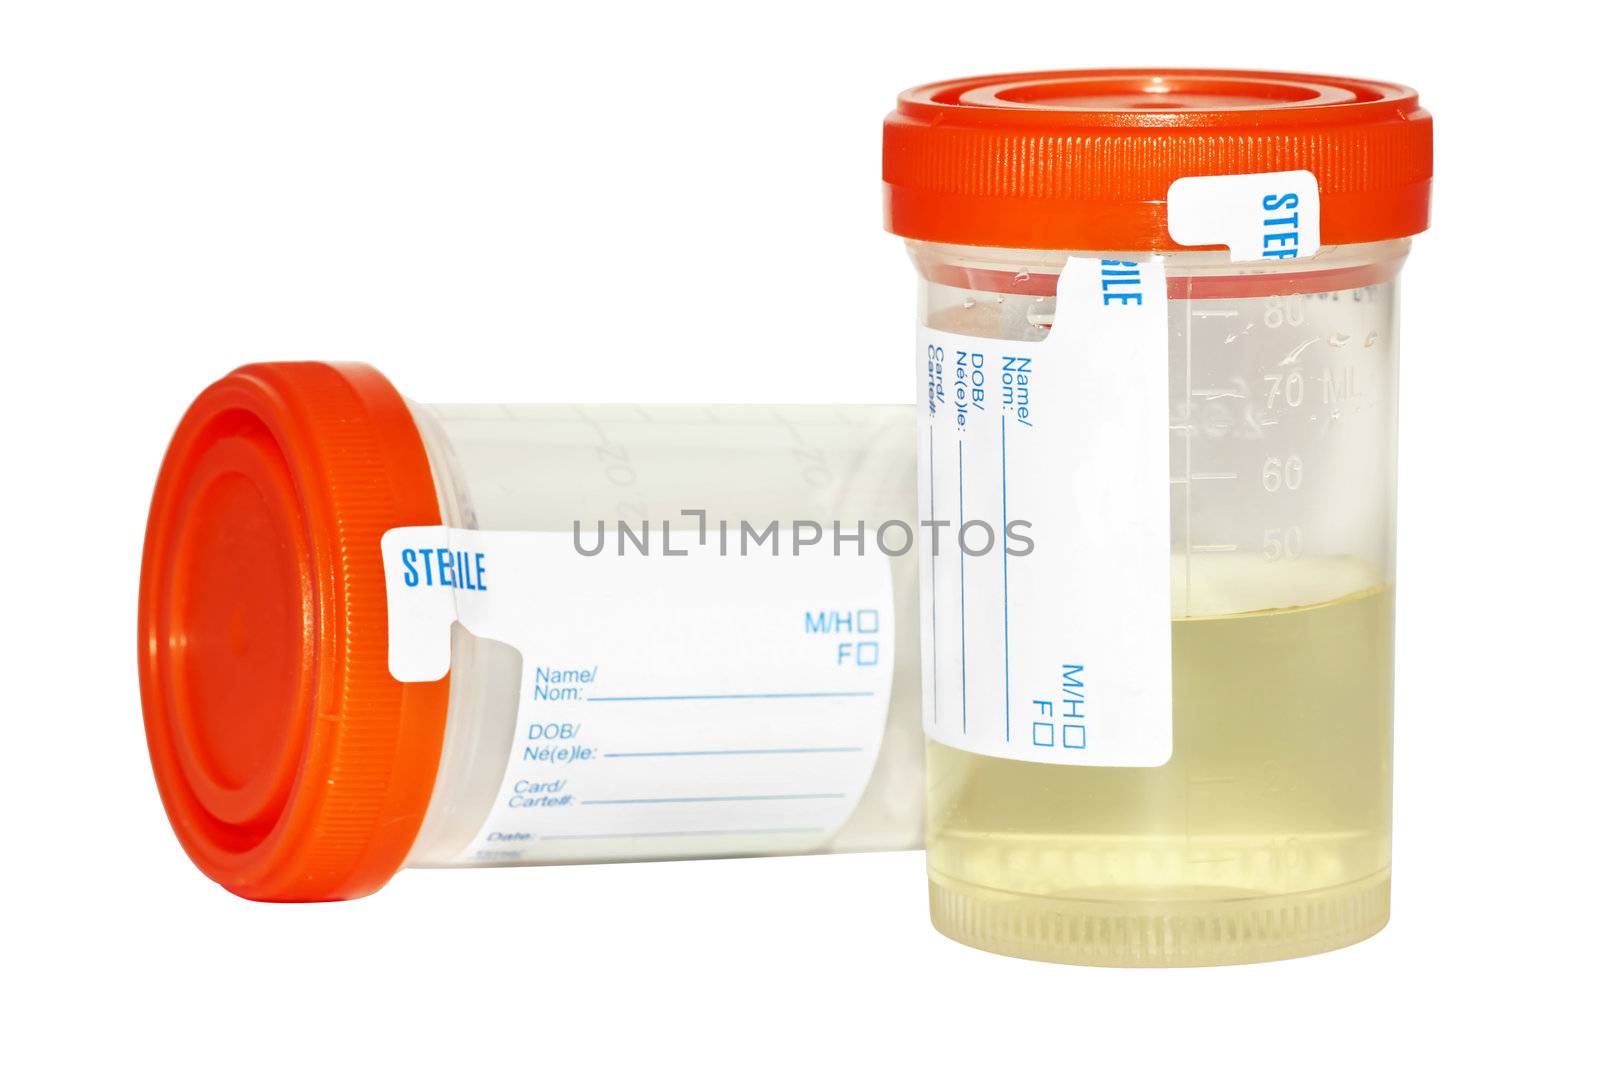 Urine sample and empty collection bottle by Mirage3